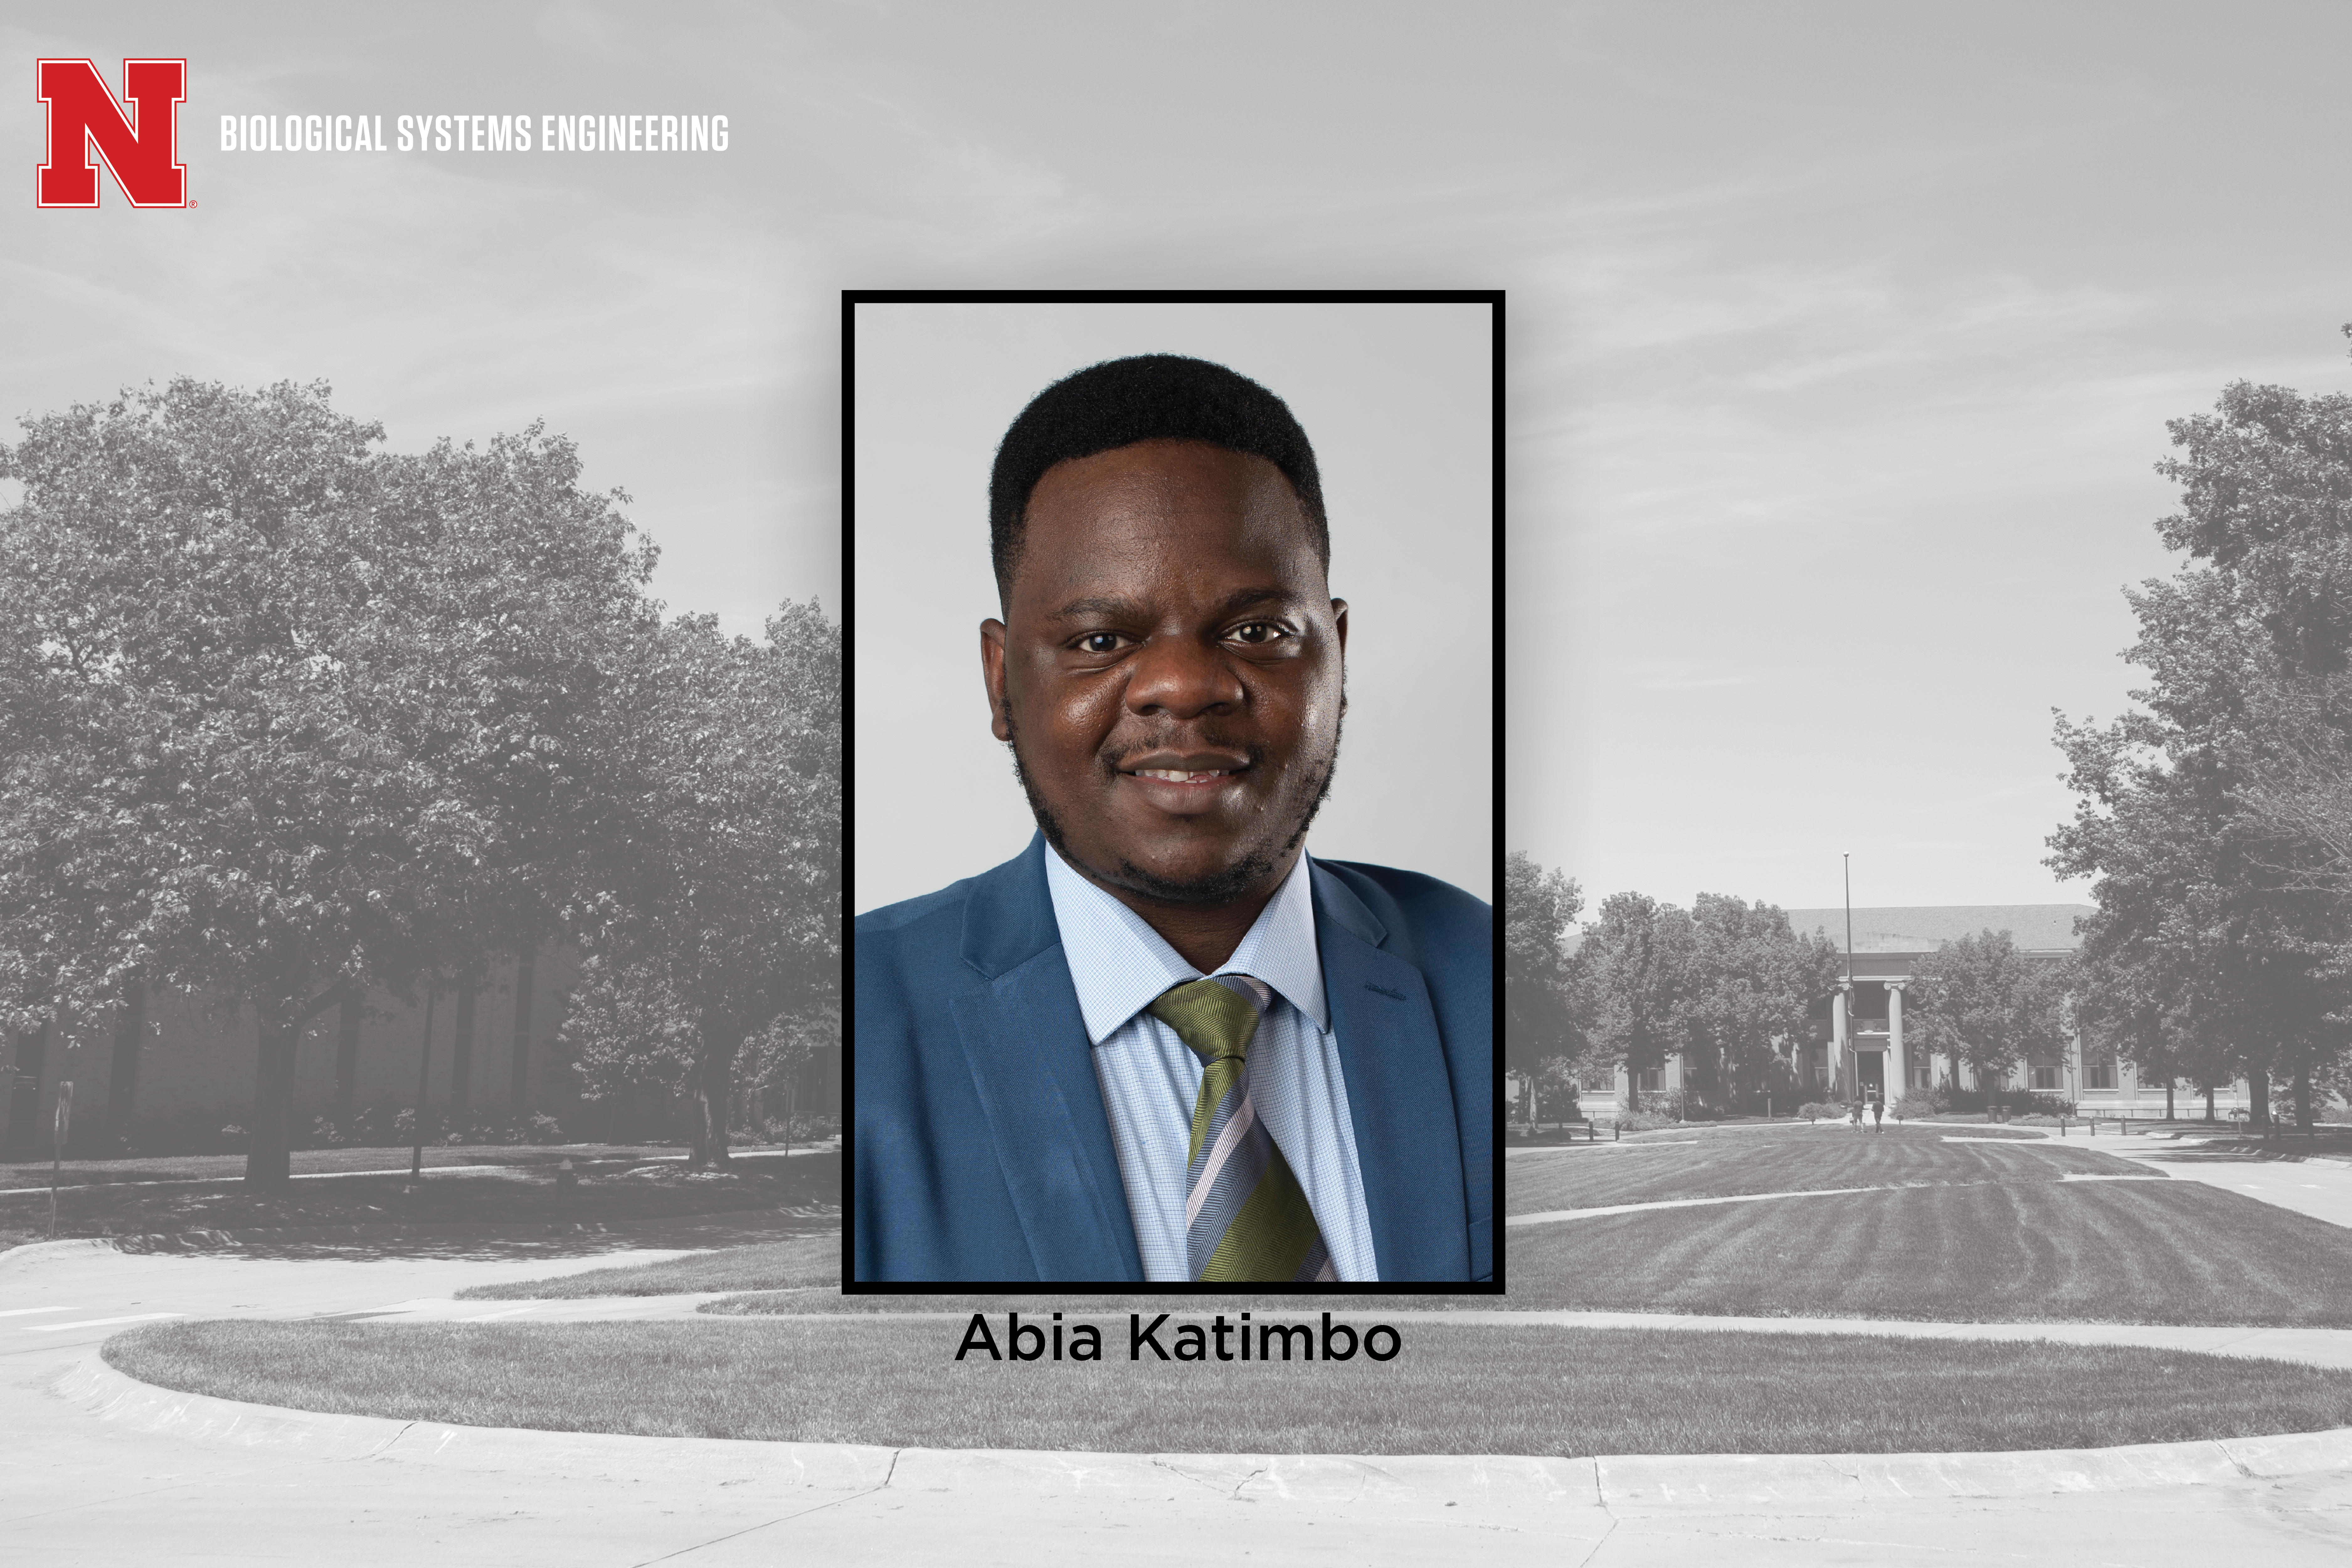 Katimbo joins BSE faculty as assistant professor, irrigation engineering management specialist